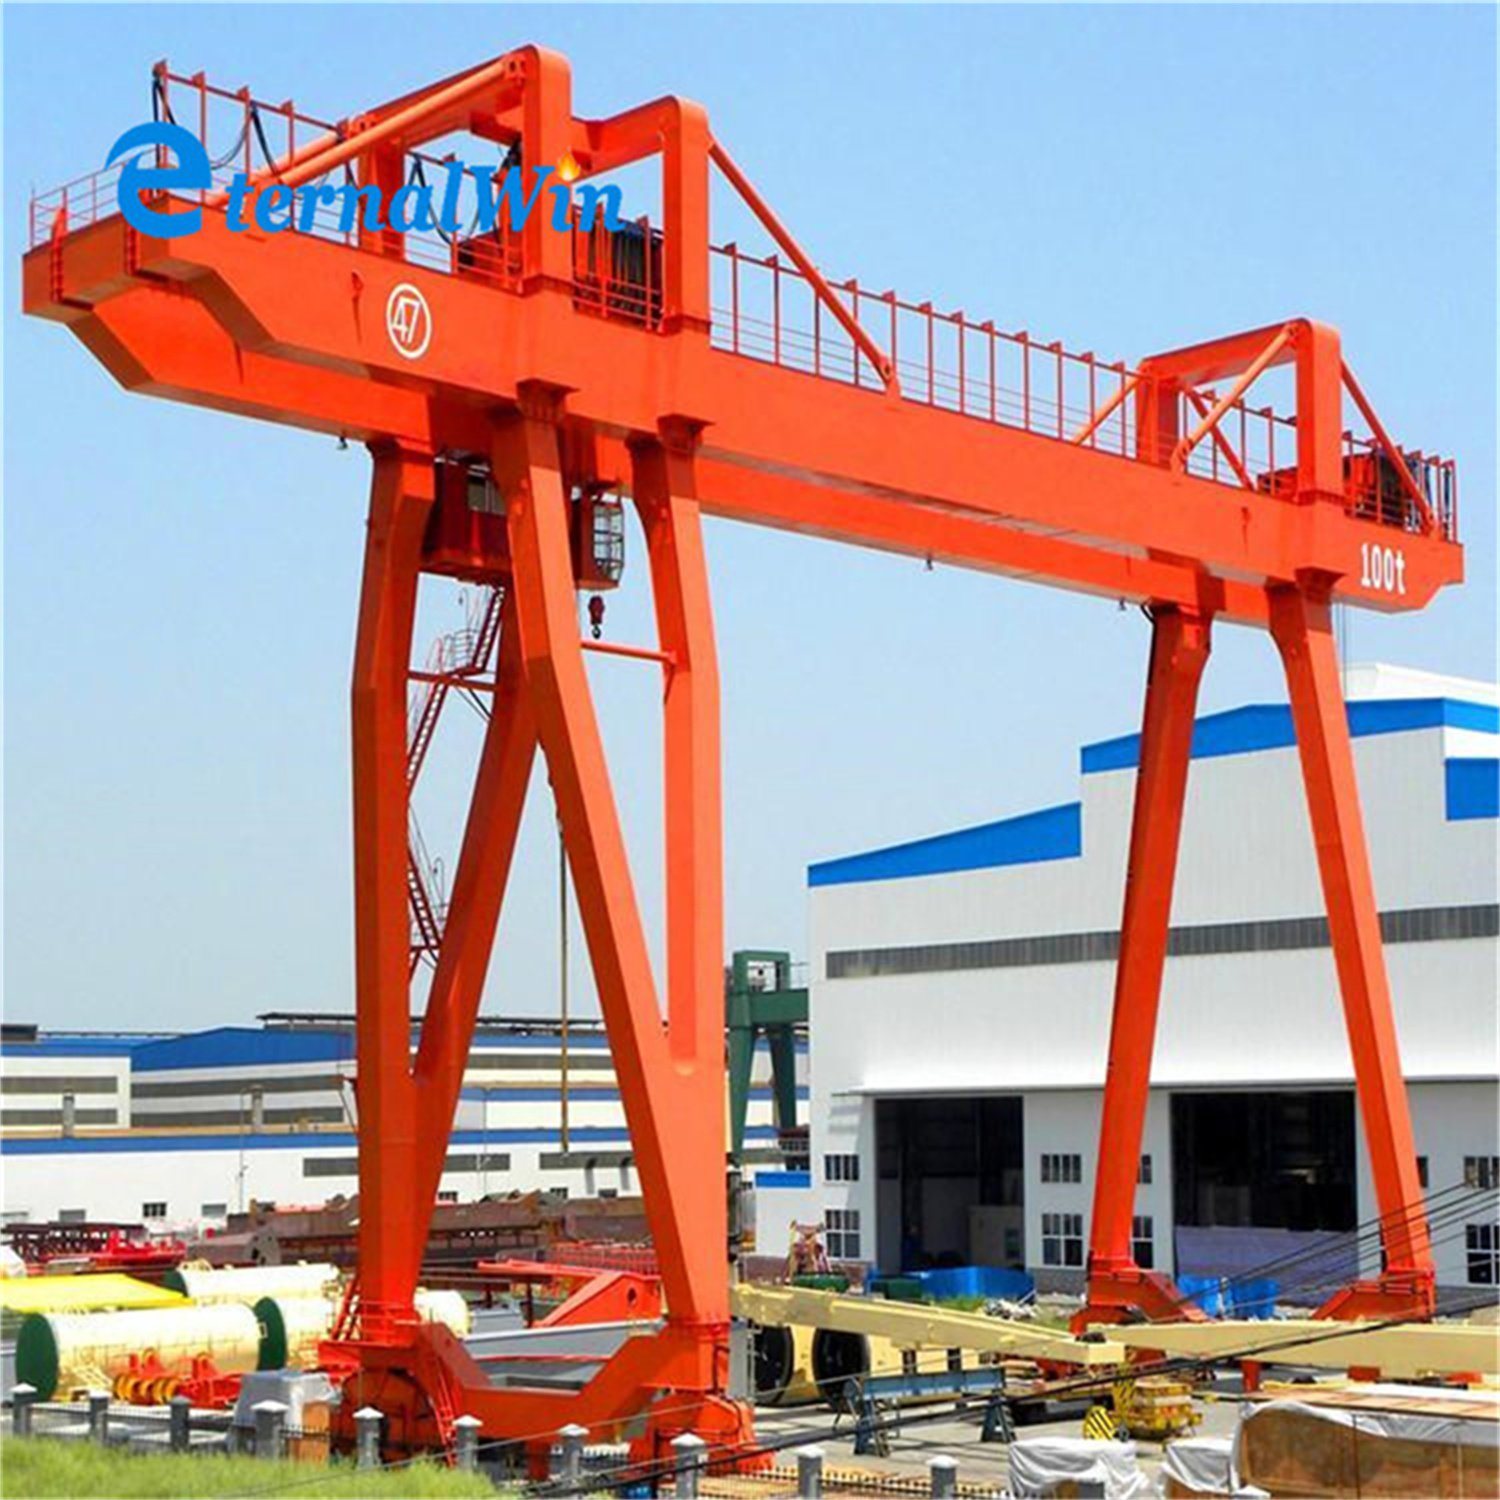 20t Mobile Electric Wire Rope Cable Hoist Gantry Overhead Crane for Material Handling Lifting Equipment